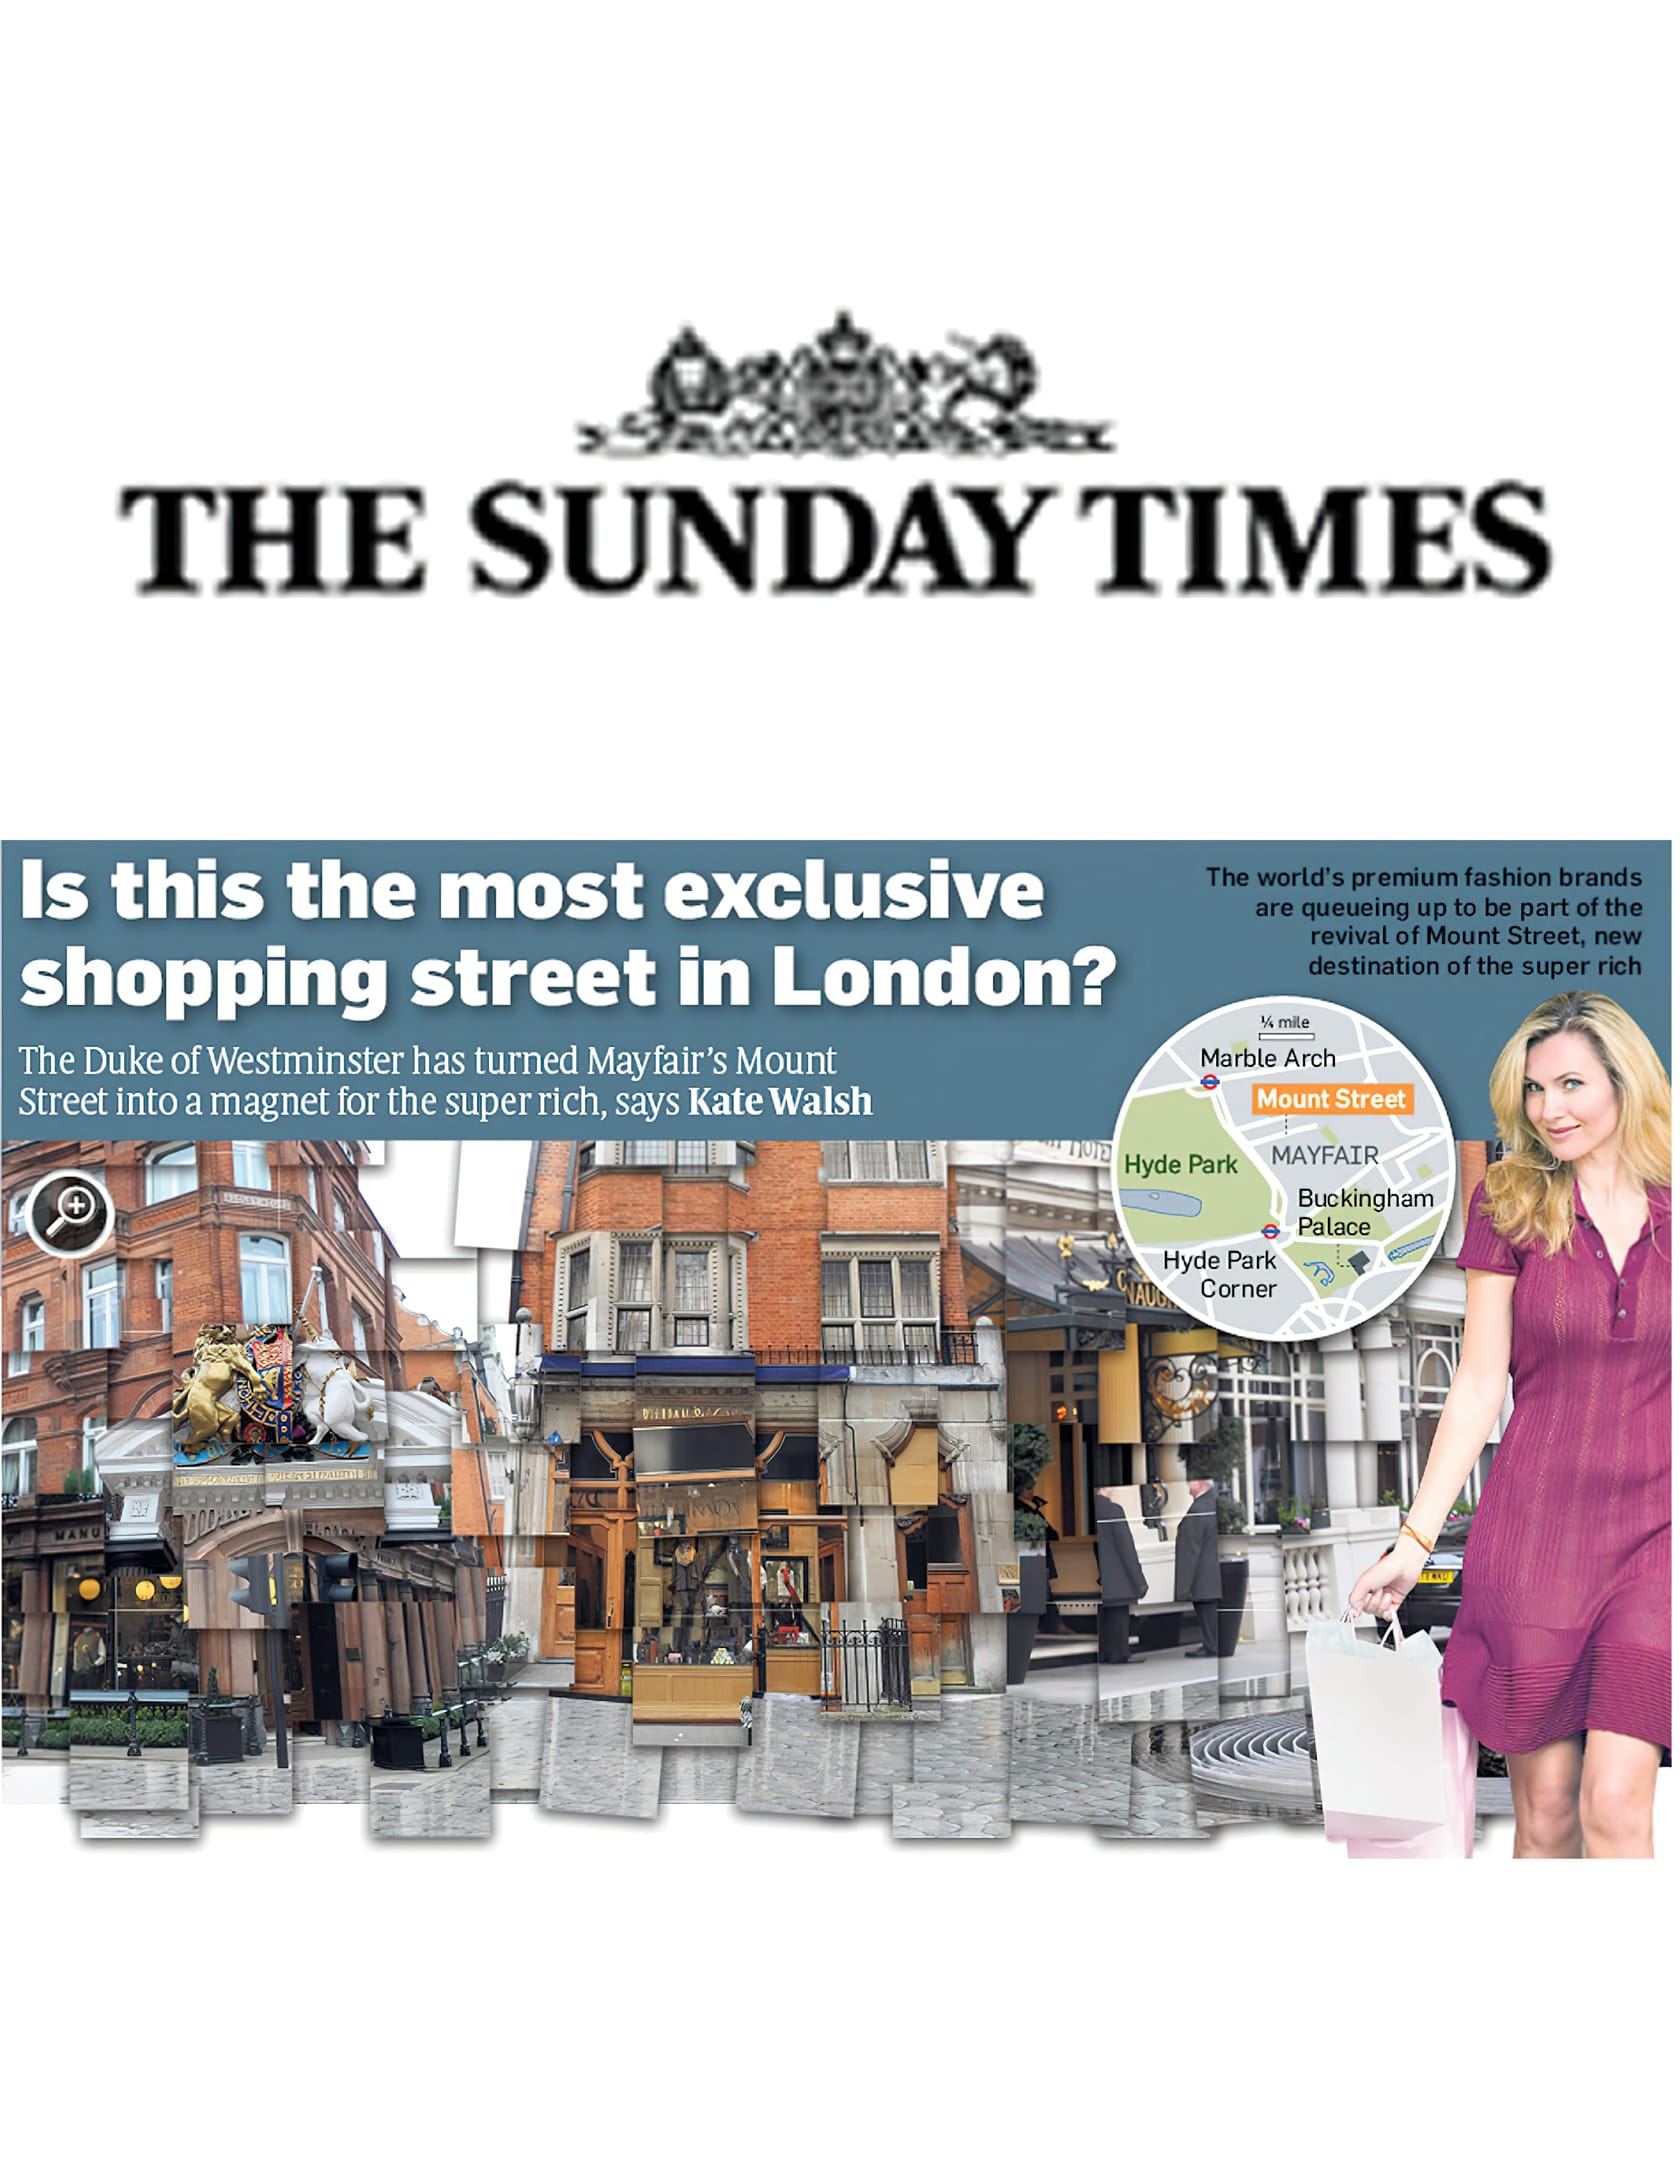 'Is this the most exclusive shopping street in London?' - The Sunday Times on Mark Glenn's Mount Street